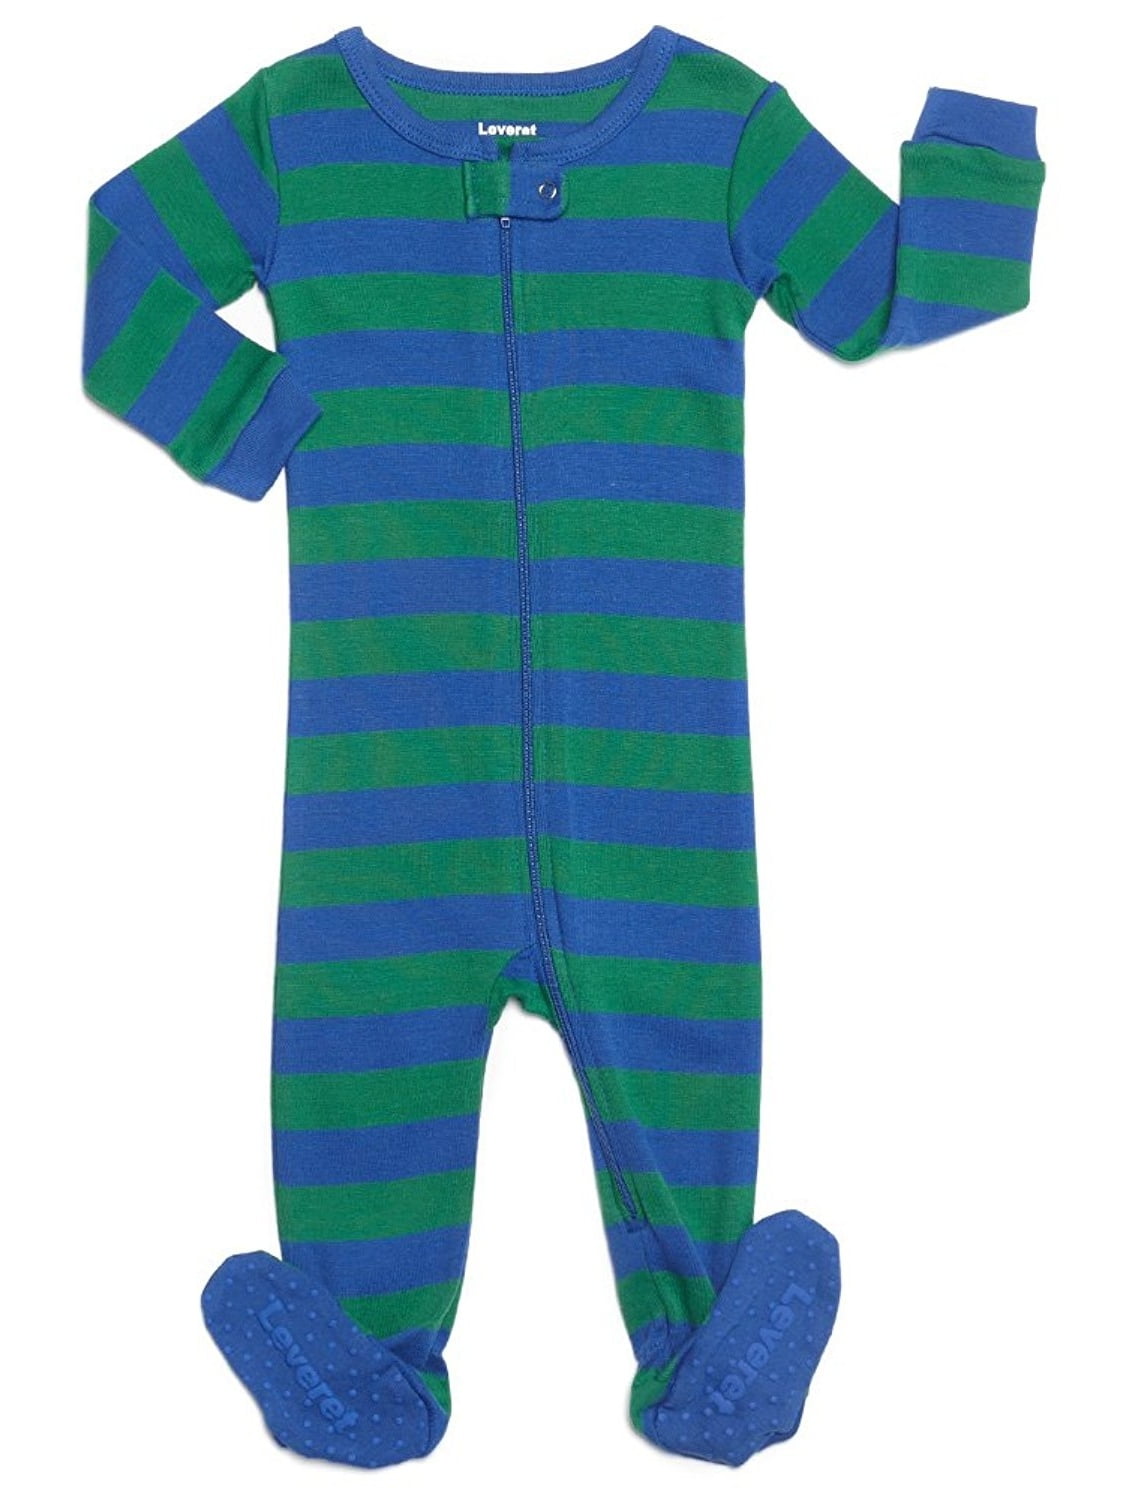 Size 6M-5Y Leveret Baby Boys Blue & White Striped Footed Pajama 100% Cotton 